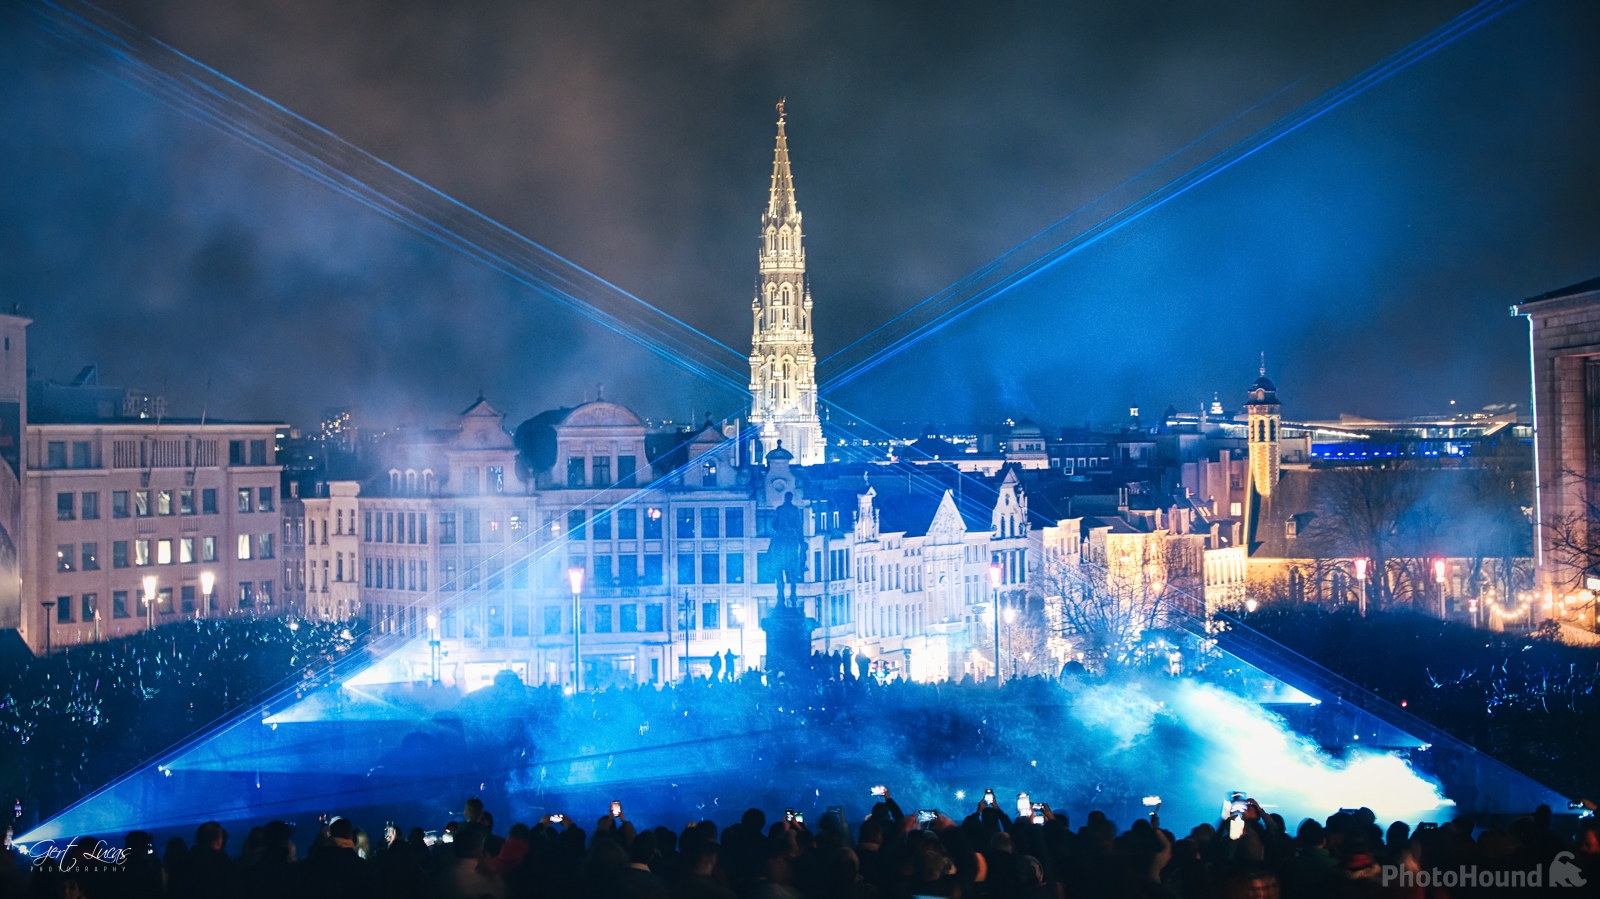 Image of Brussels Bright - Light festival by Gert Lucas